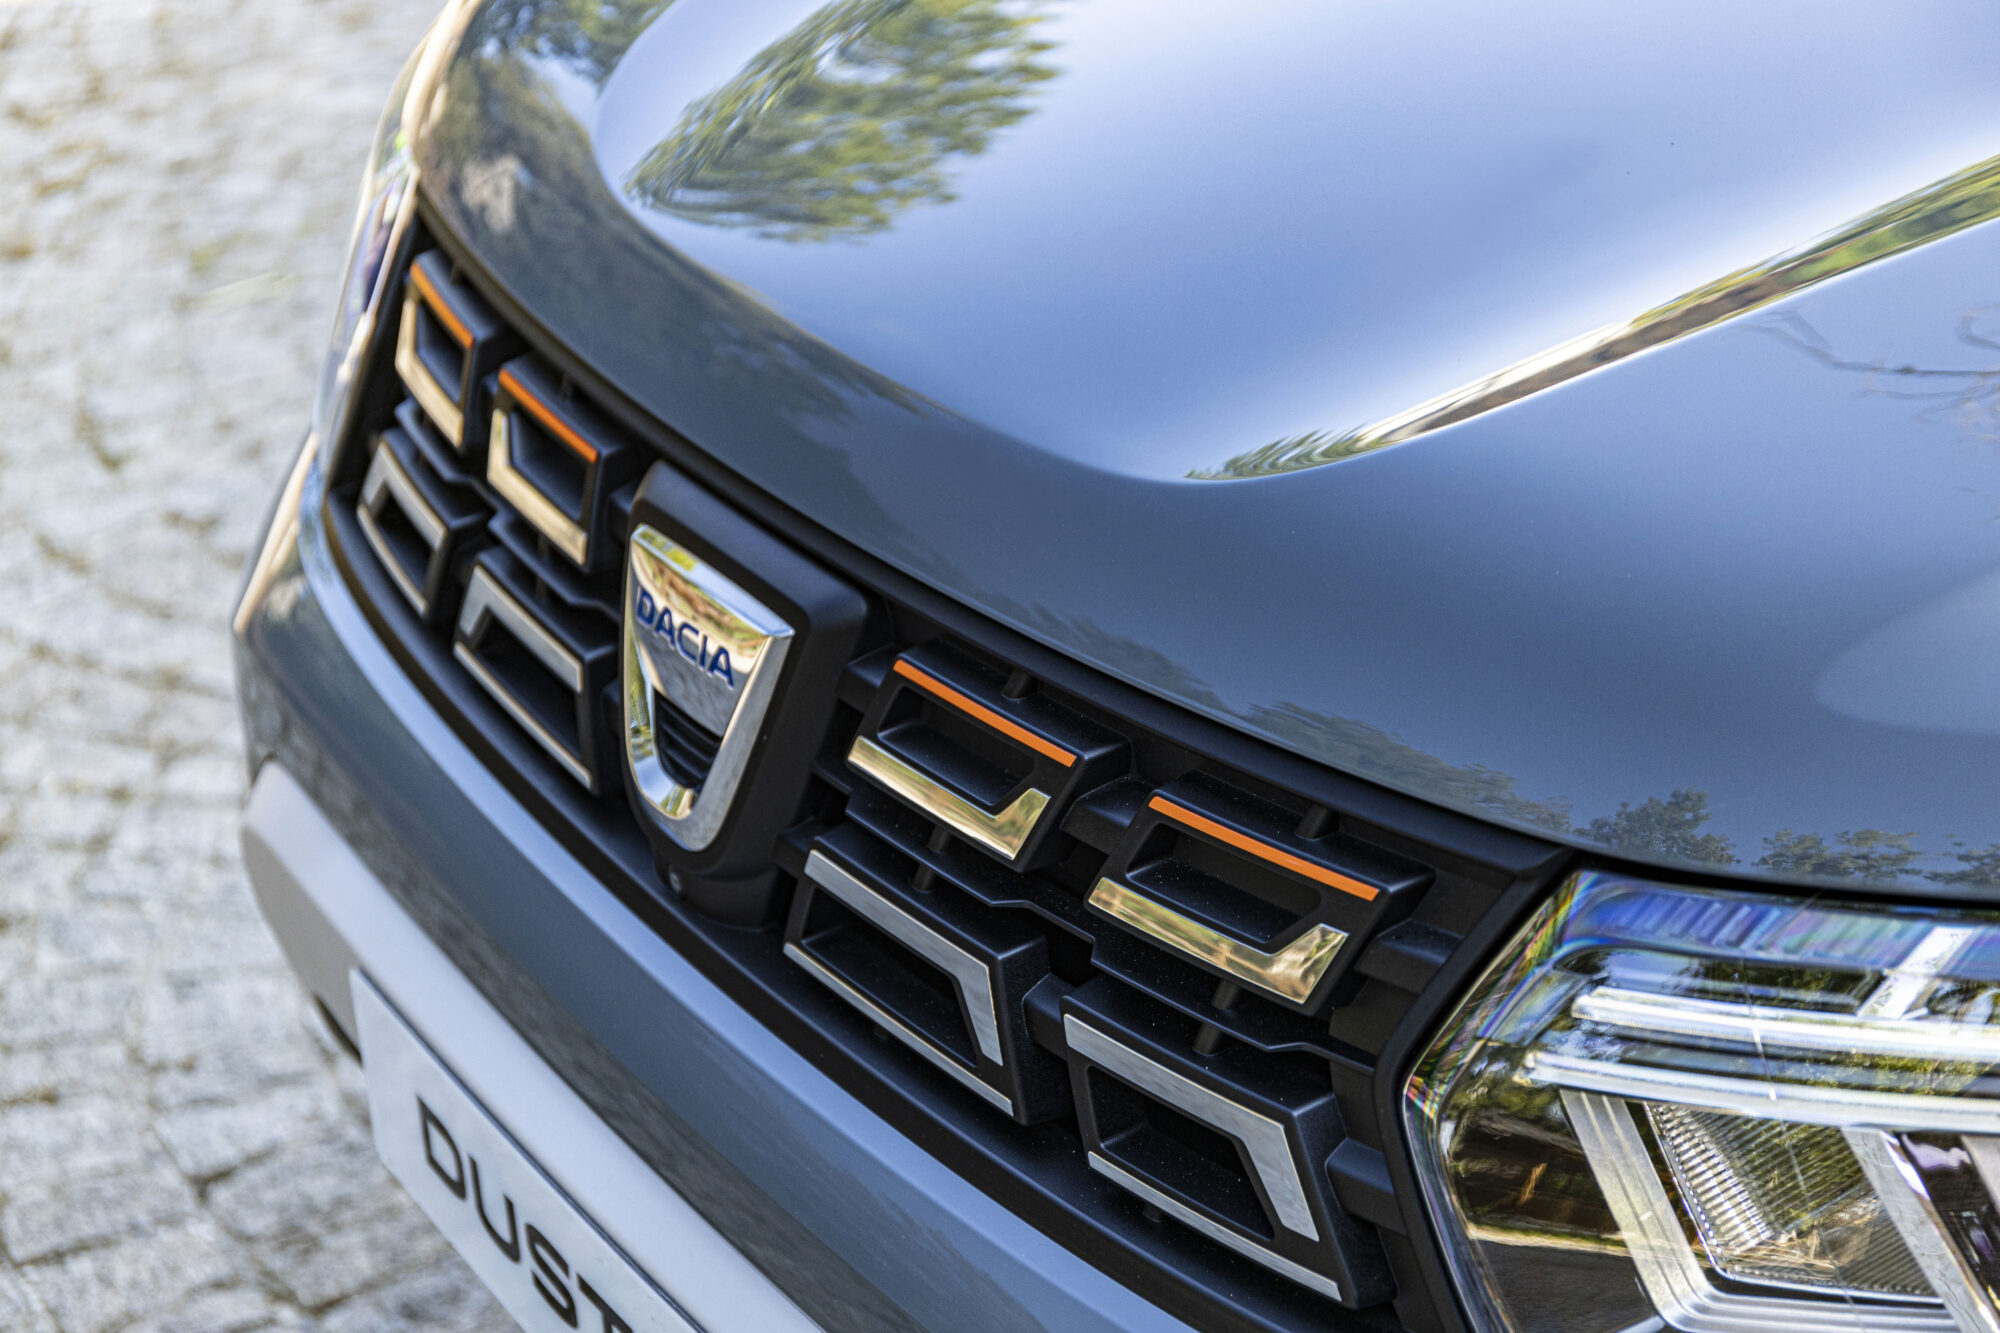 2021 - New Dacia Duster Extreme Limited Edition